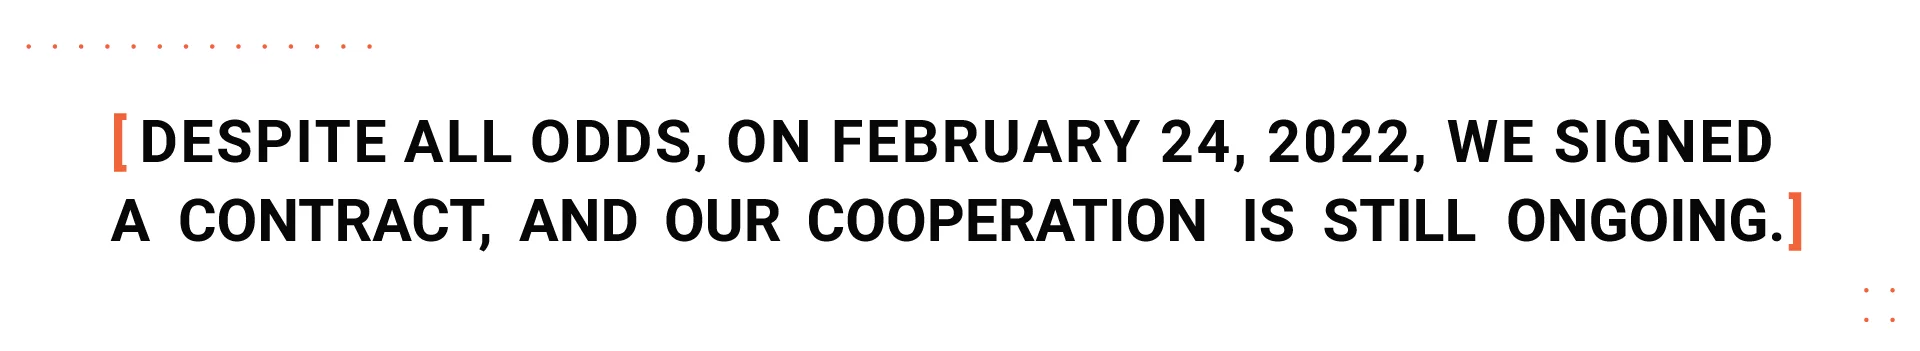 Despite-all-odds-on-February-24-2022-we-signed-a-contract-and-our-cooperation-is-still-ongoing.-150x150